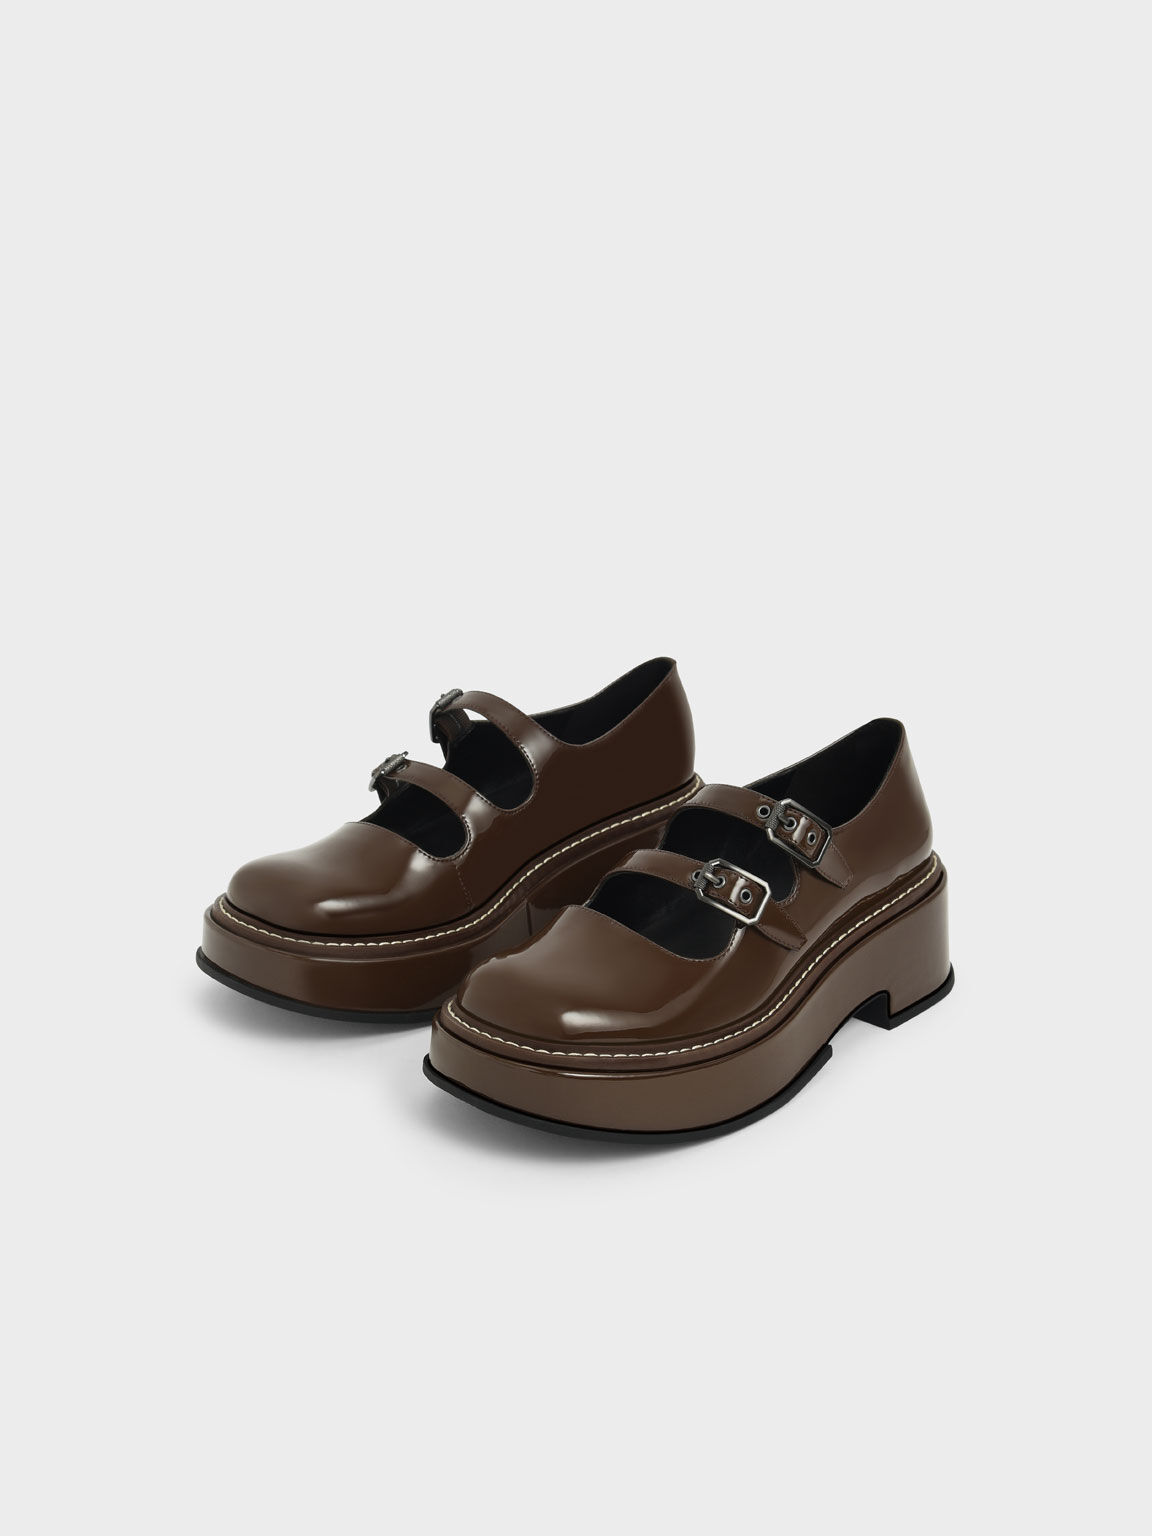 Shoes Low Shoes Mary Janes Clarks Mary Janes brown elegant 